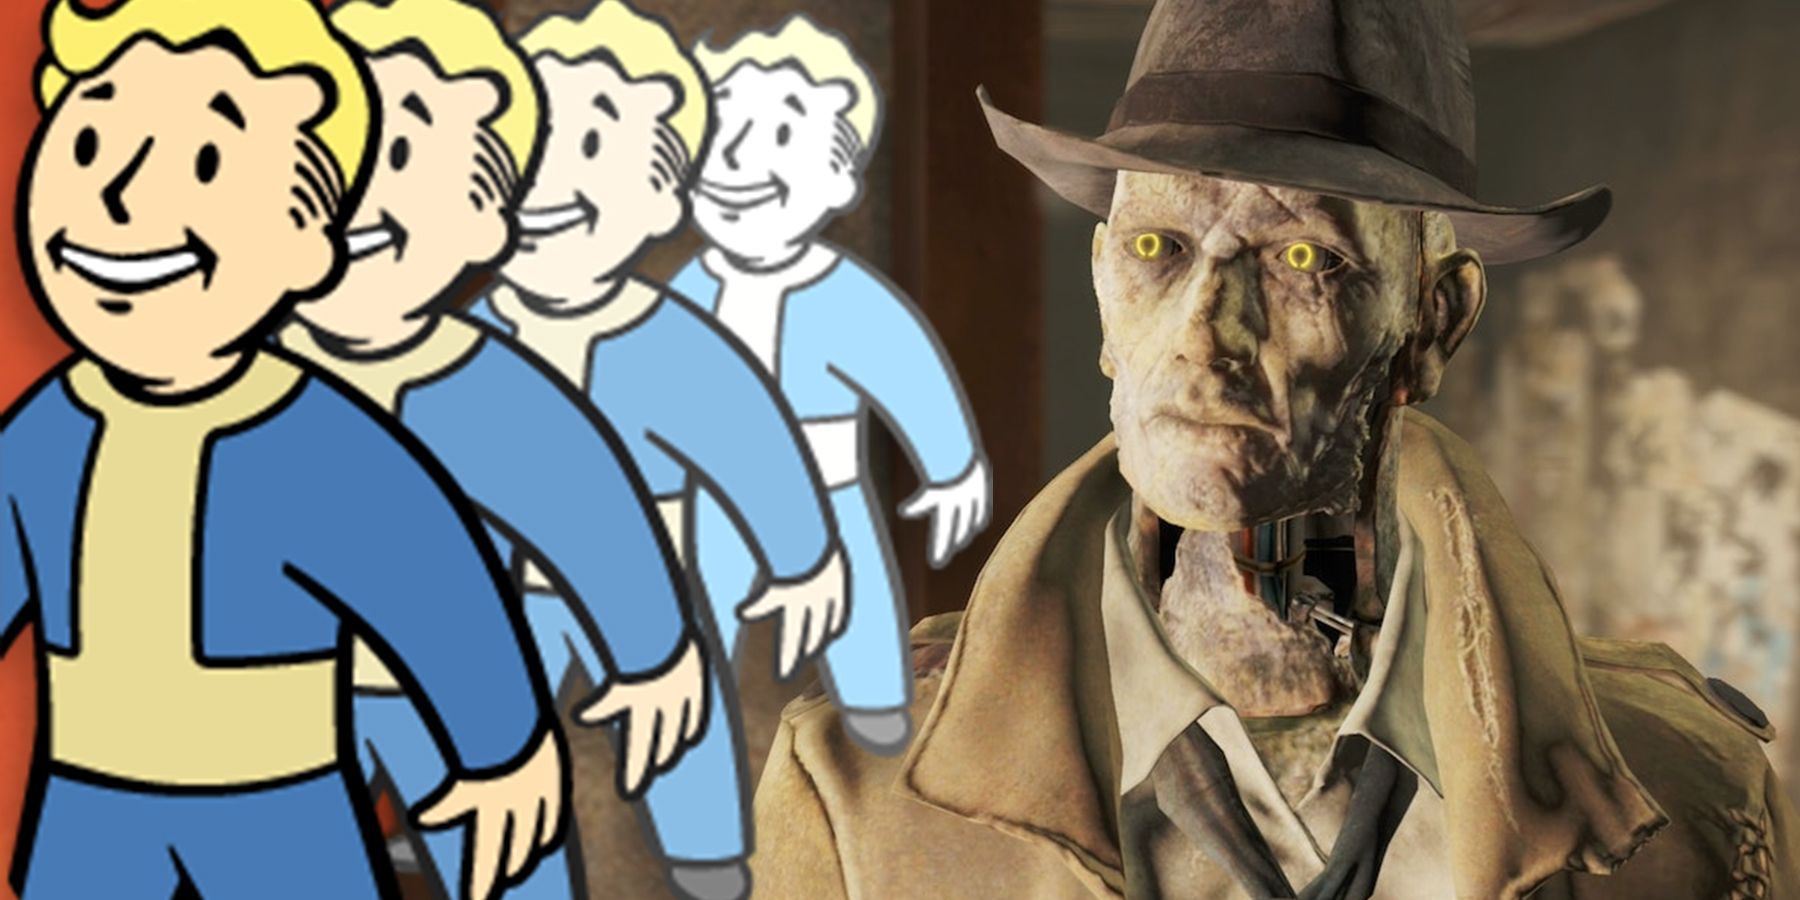 fallout-3-4-vault-boy-synth